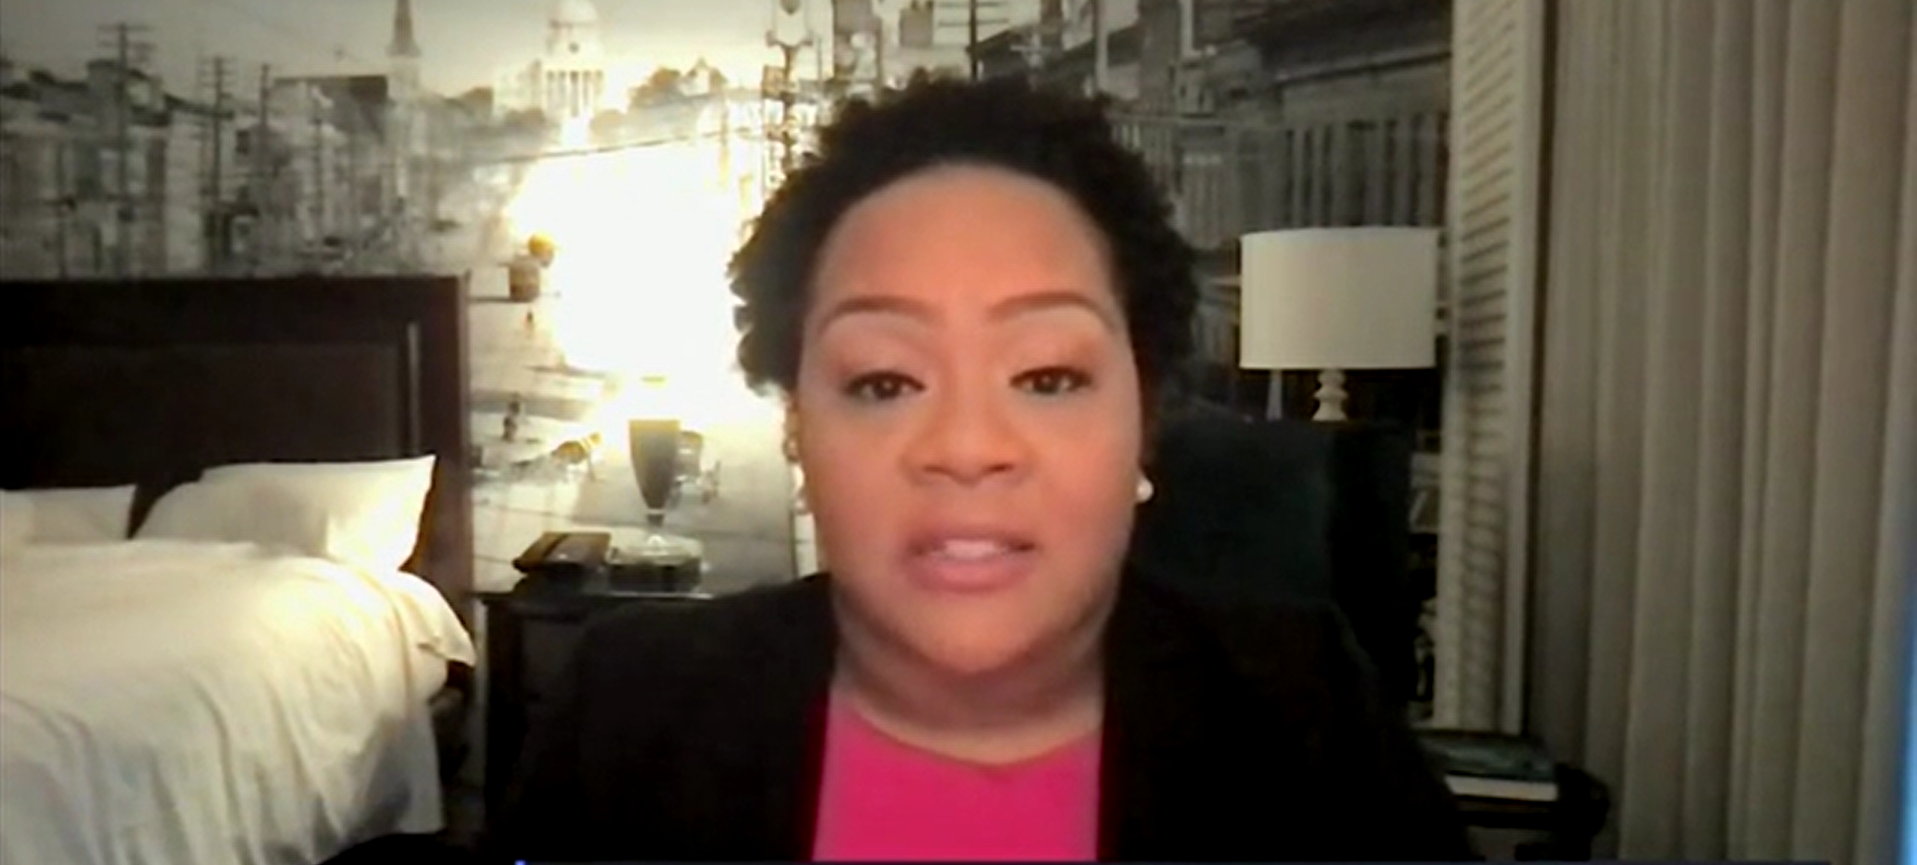 MSNBC Contributor Says Fear Of Trump Is Why Americans Think Country Is On ‘Wrong Track’